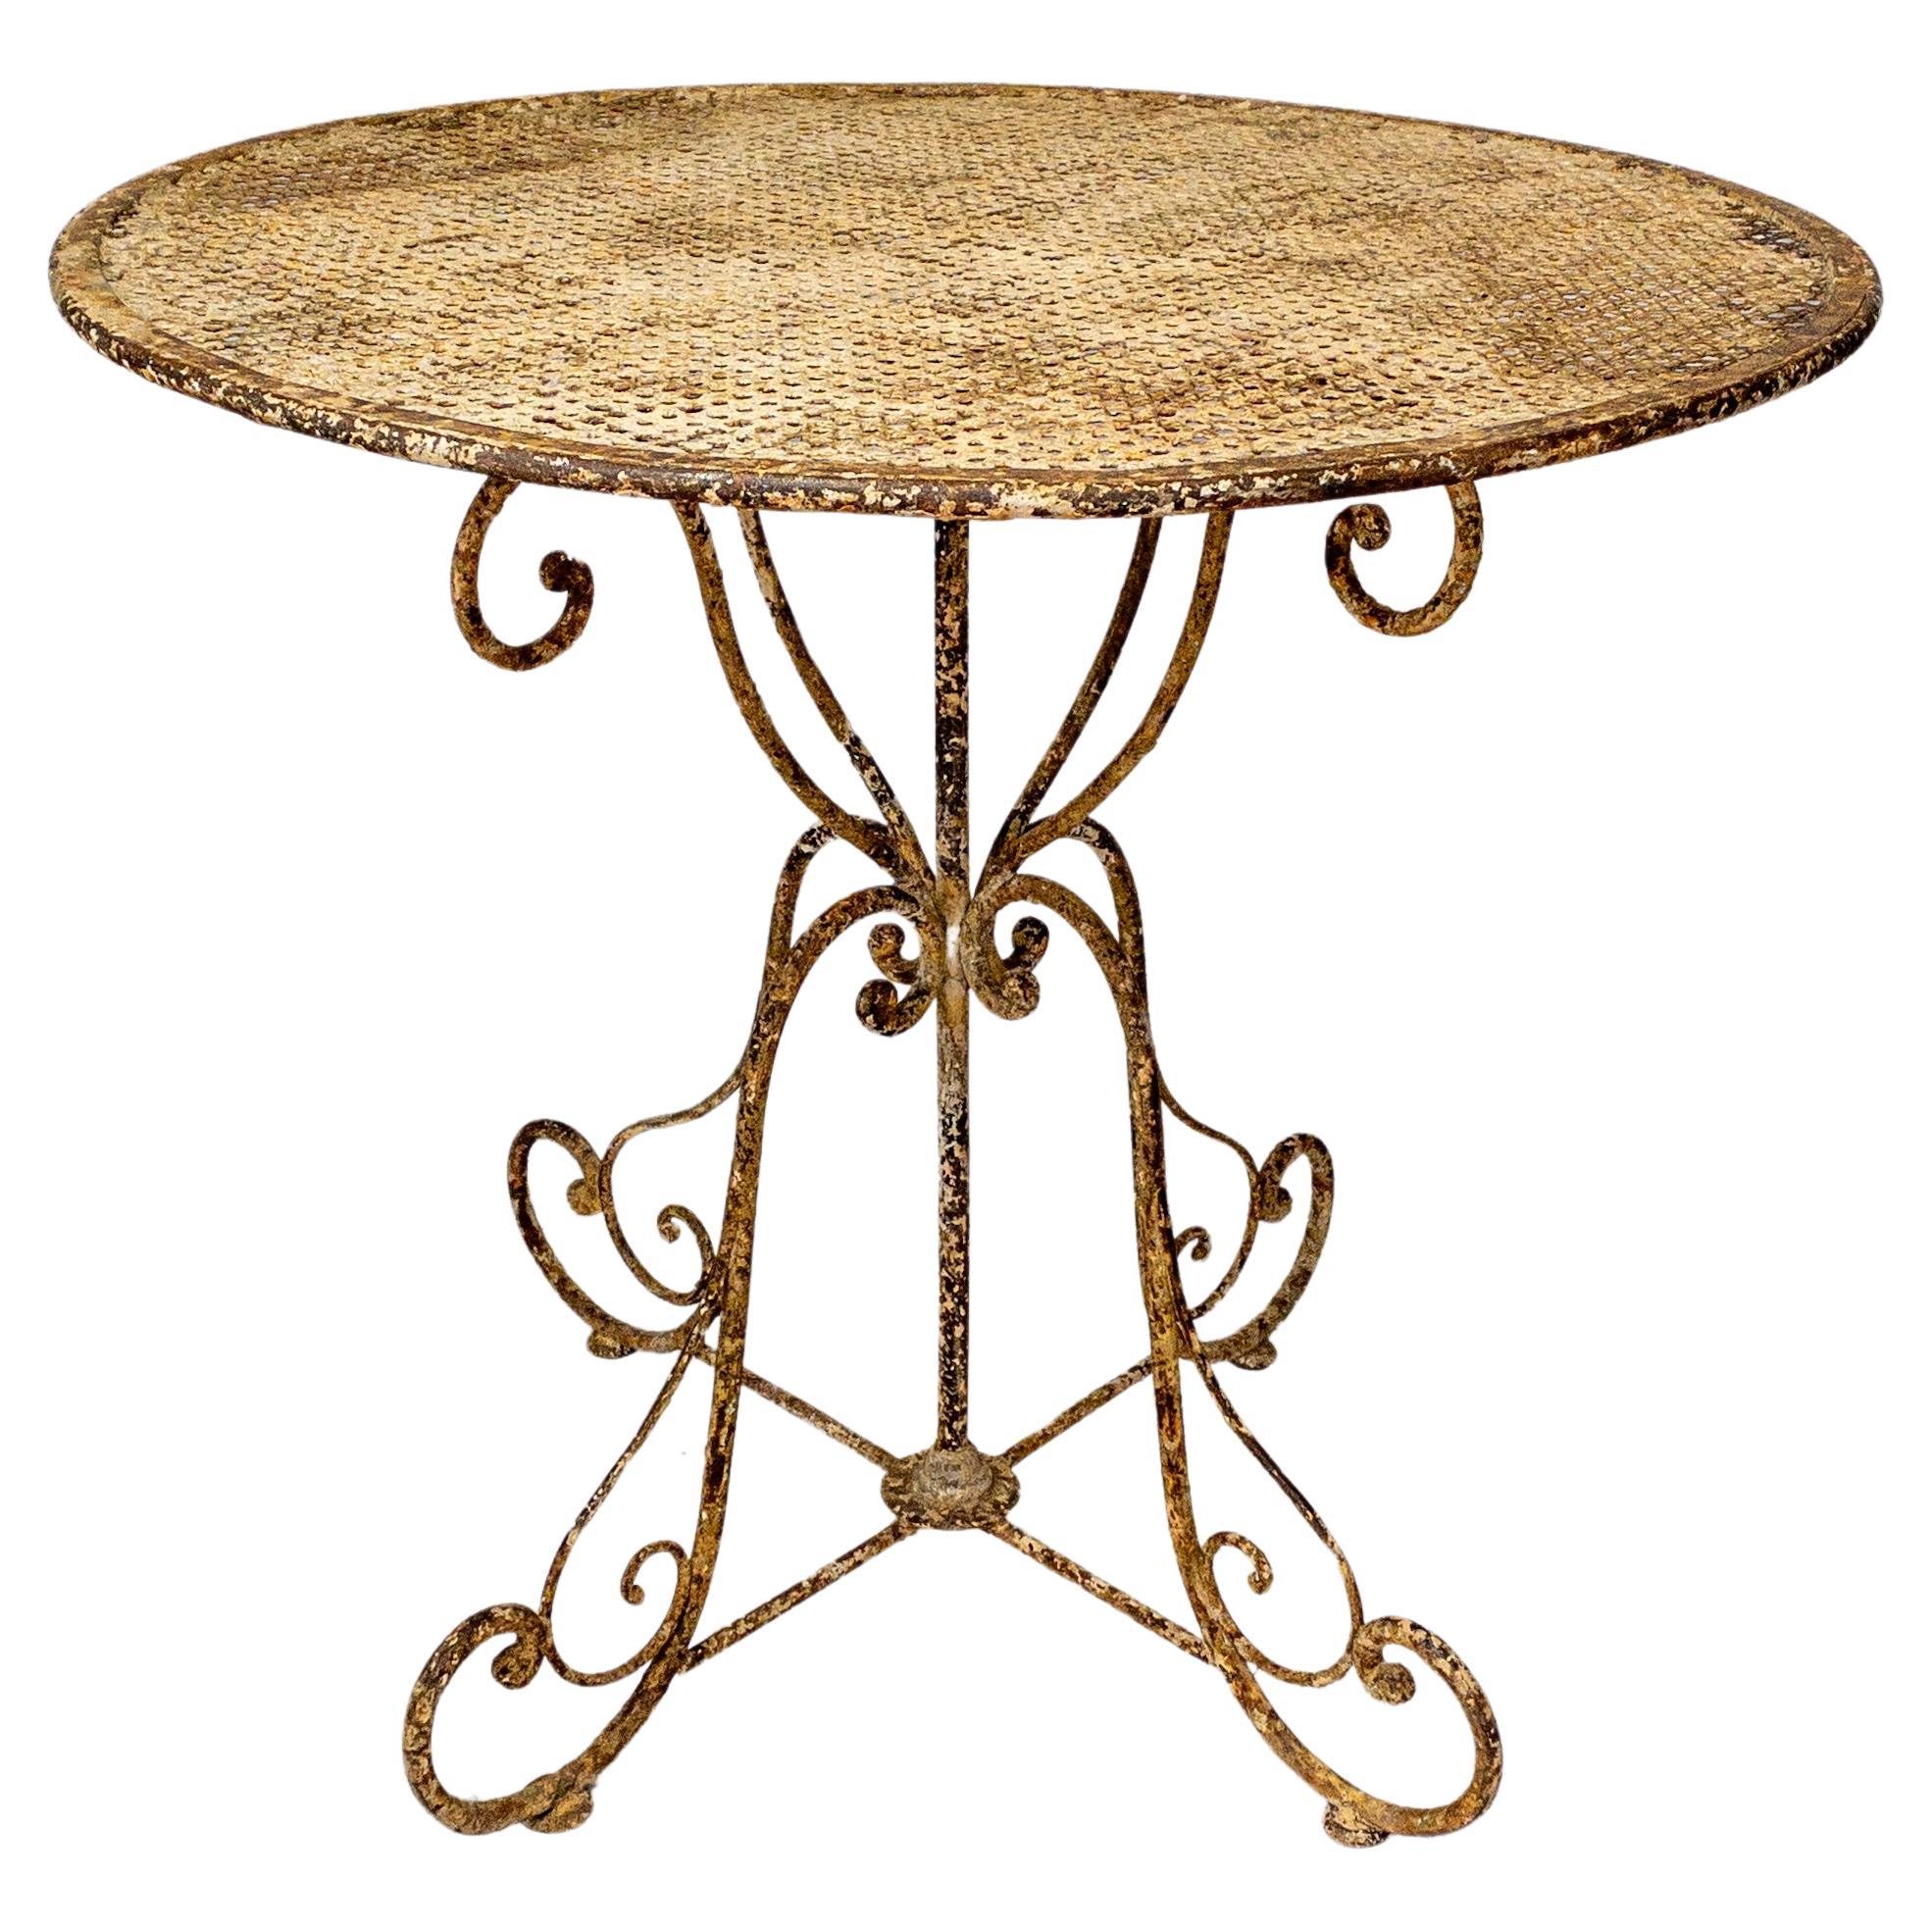 French Napoleon III Period Wrought Iron Garden Table For Sale